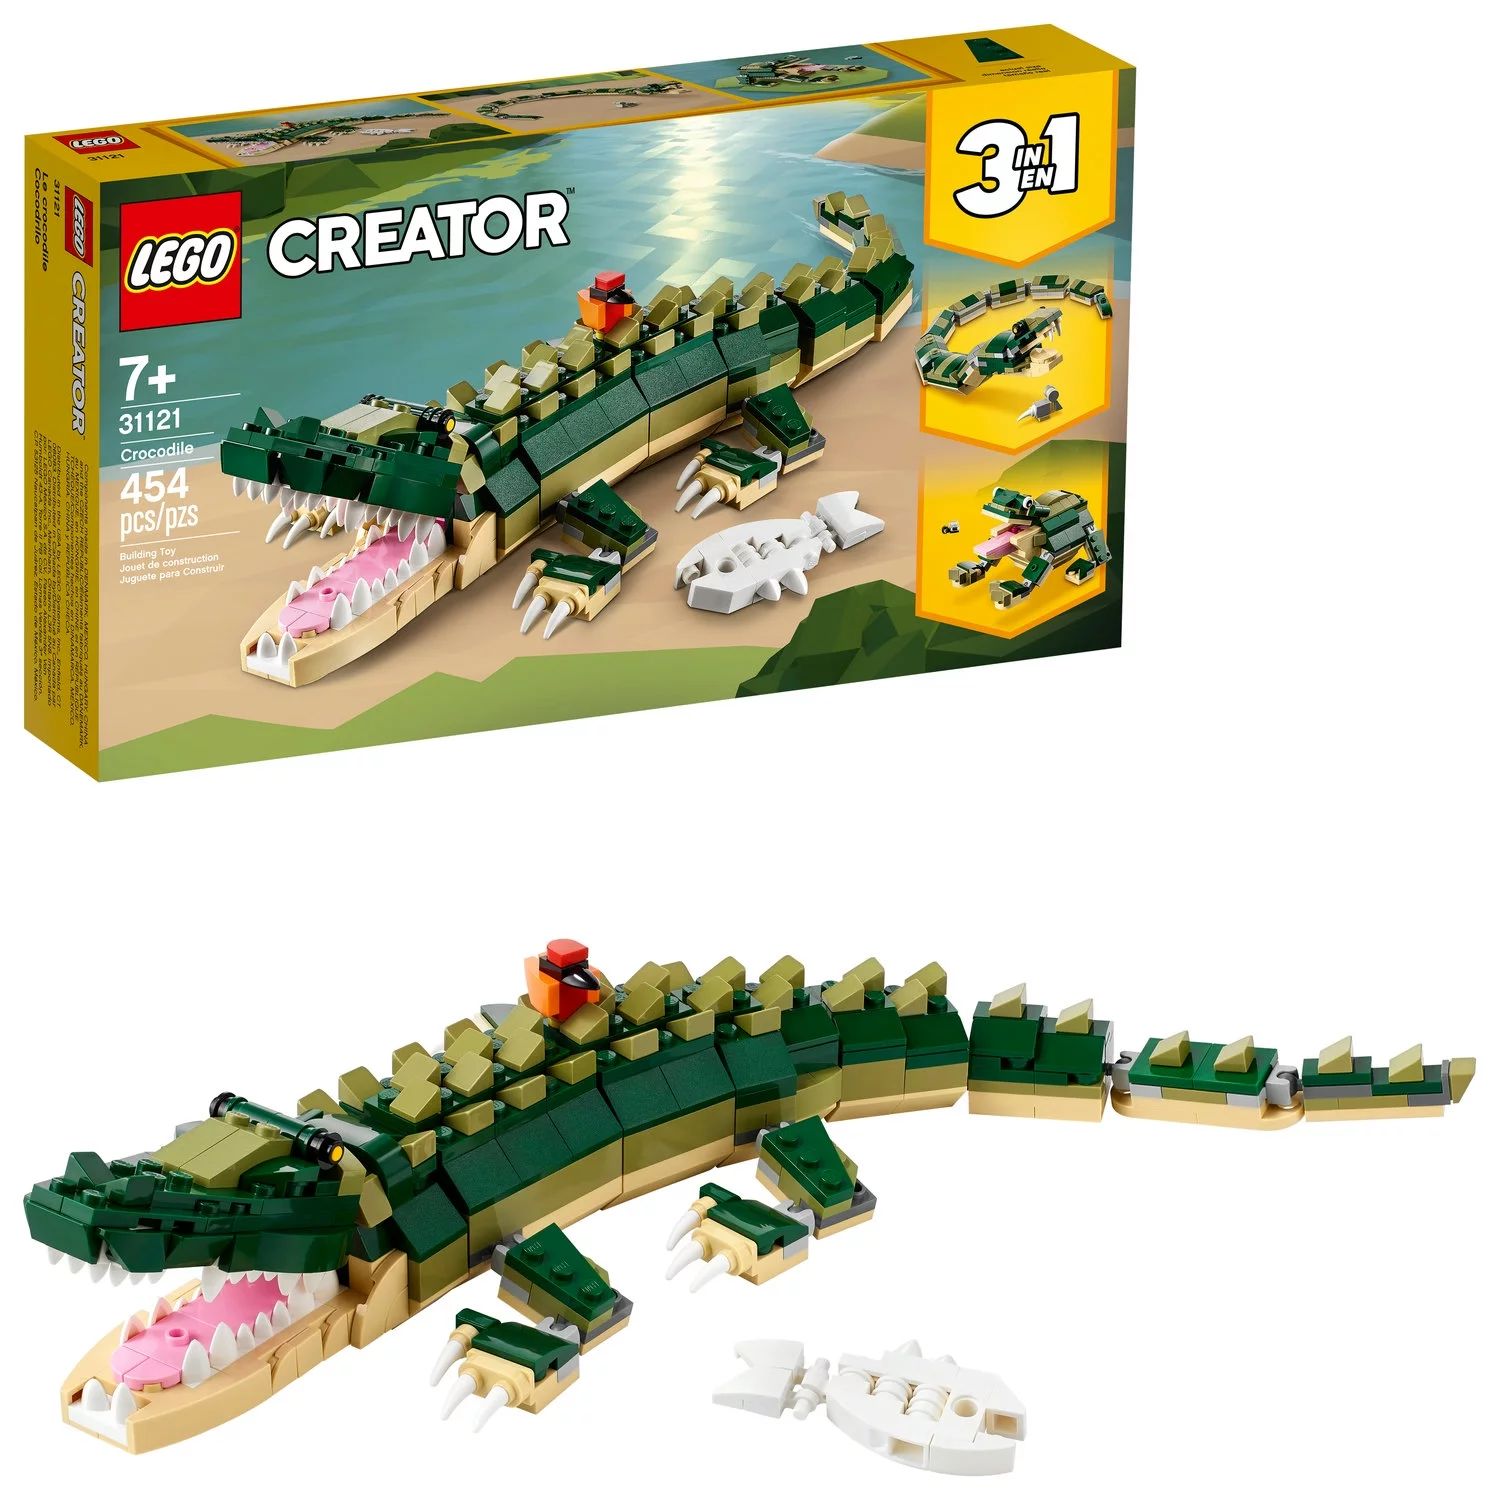 LEGO Creator 3in1 Crocodile 31121 Building Toy Featuring Wild Animal Toys for Kids (454 Pieces) -... | Walmart (US)